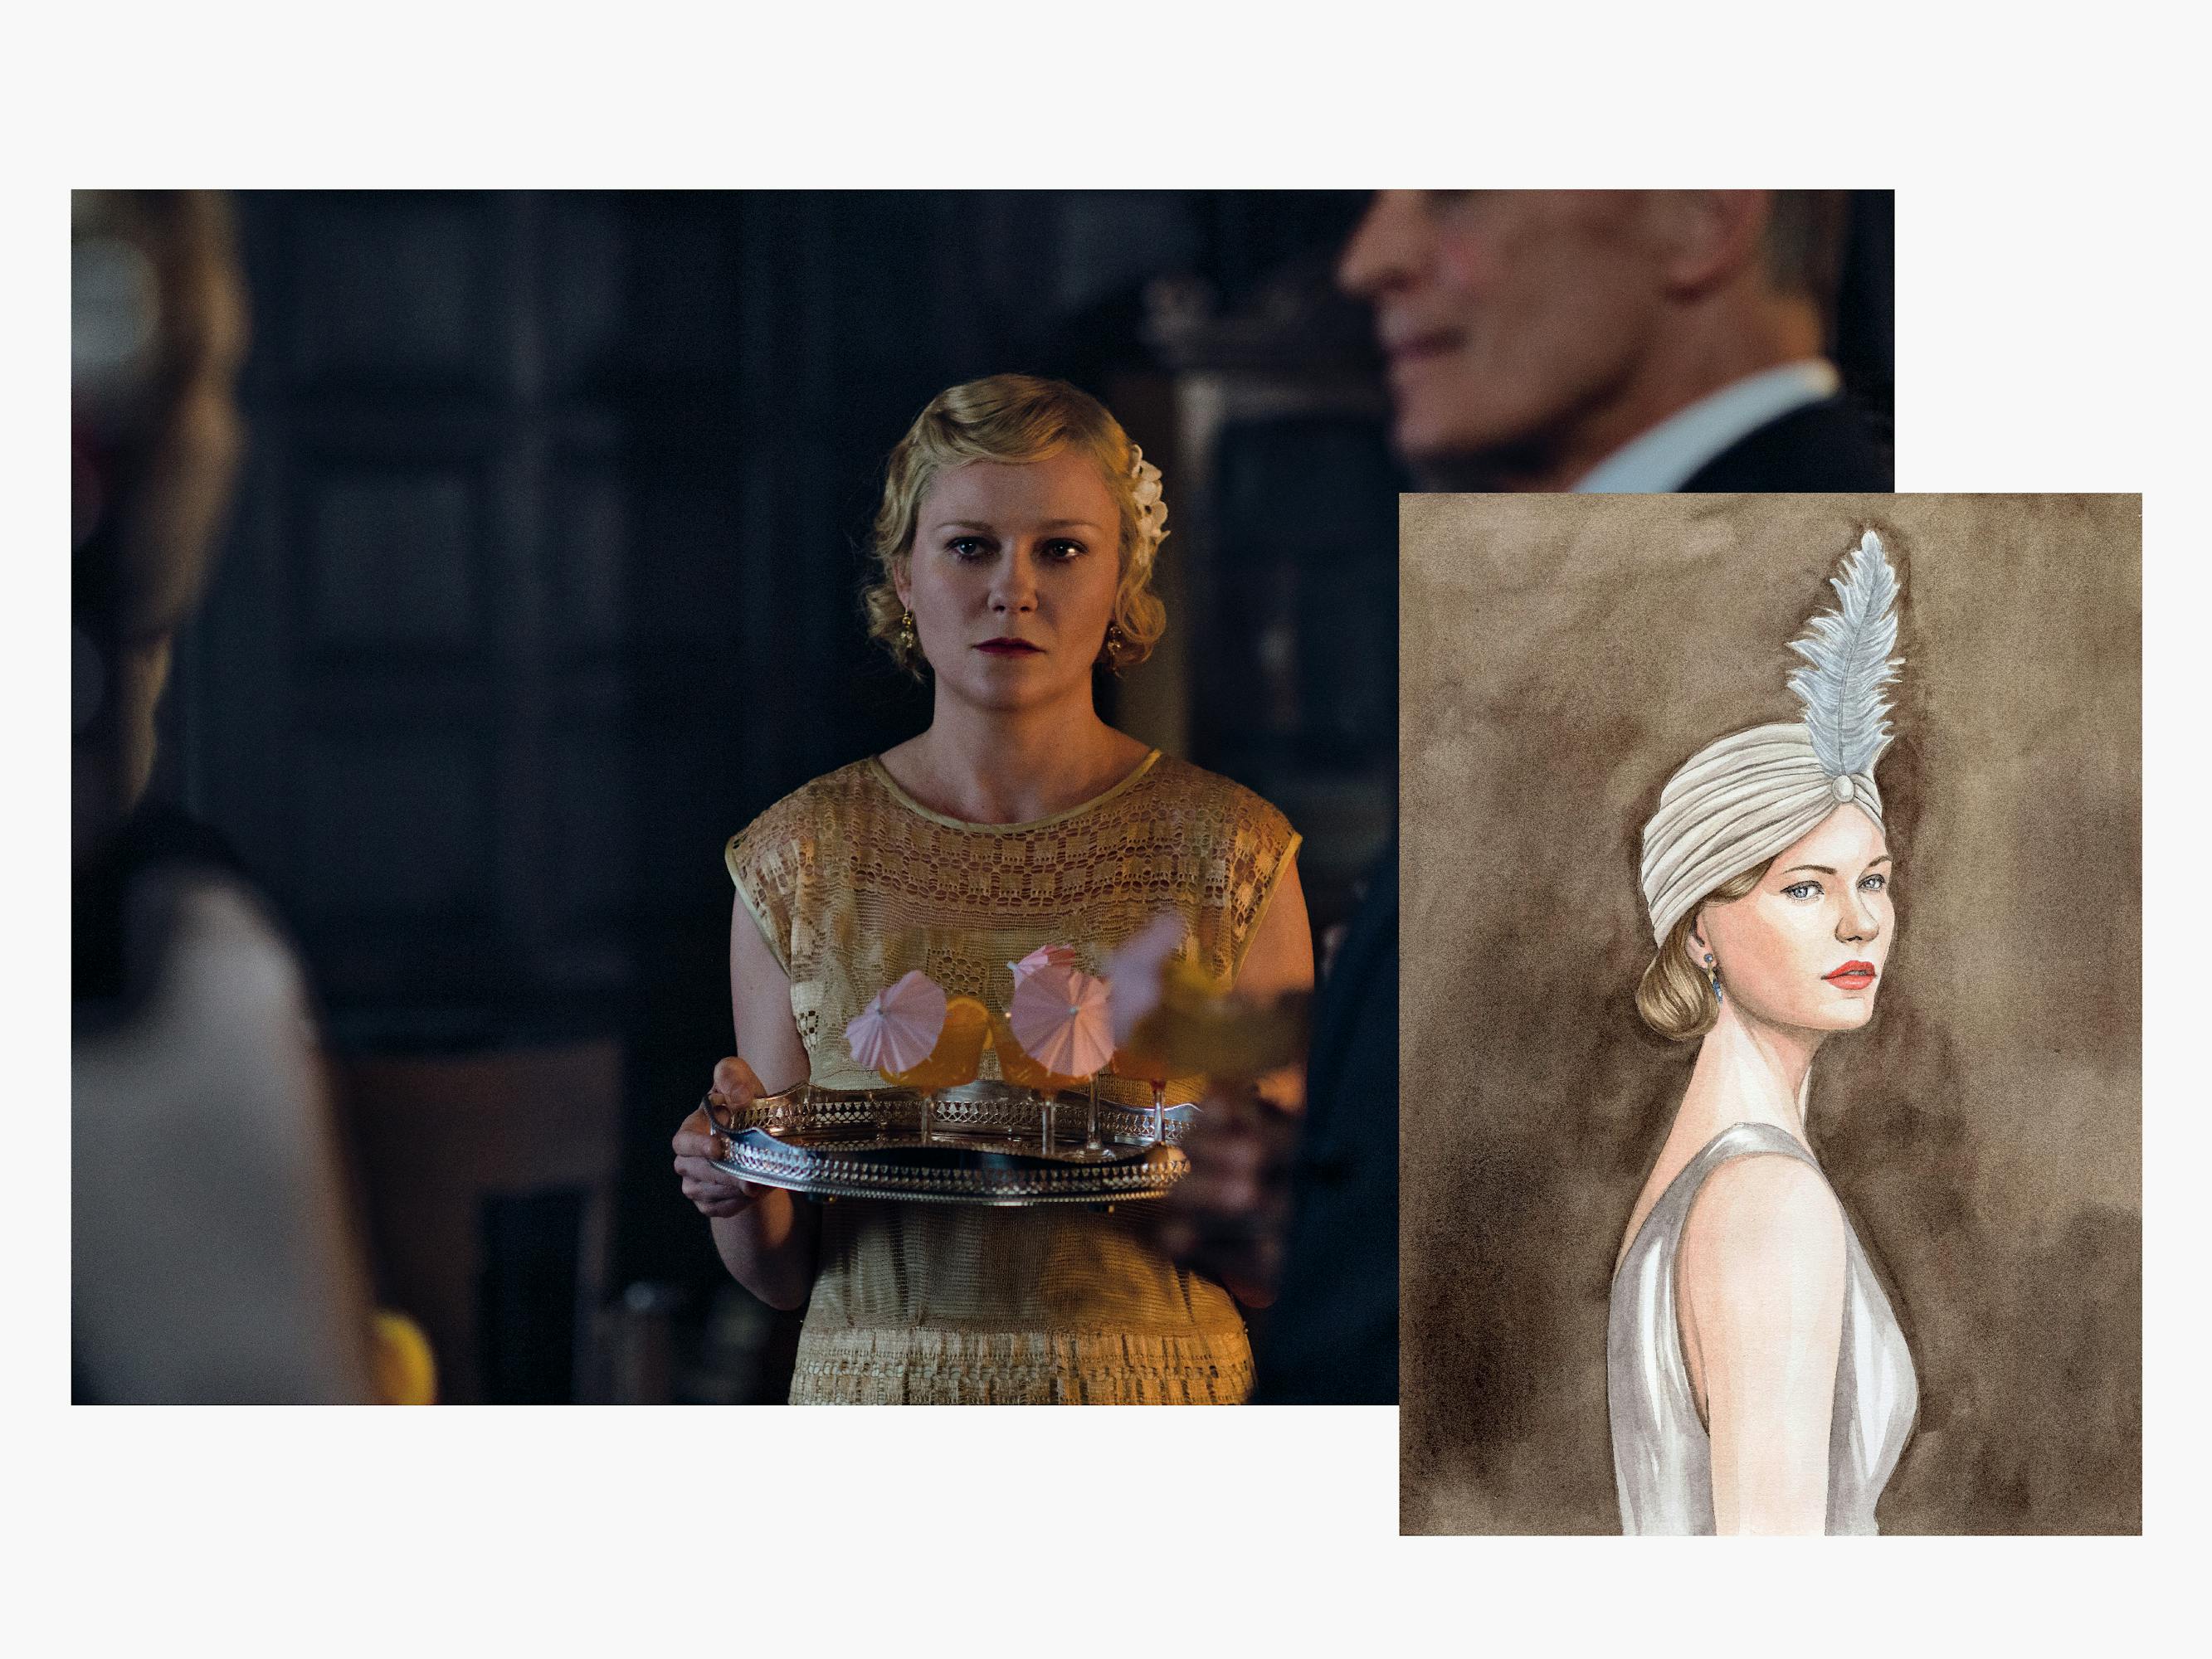 Kirsten Dunst wears a gold dress and holds a tray with drinks that have pink parasols. To the right is a small sketch of the same outfit.